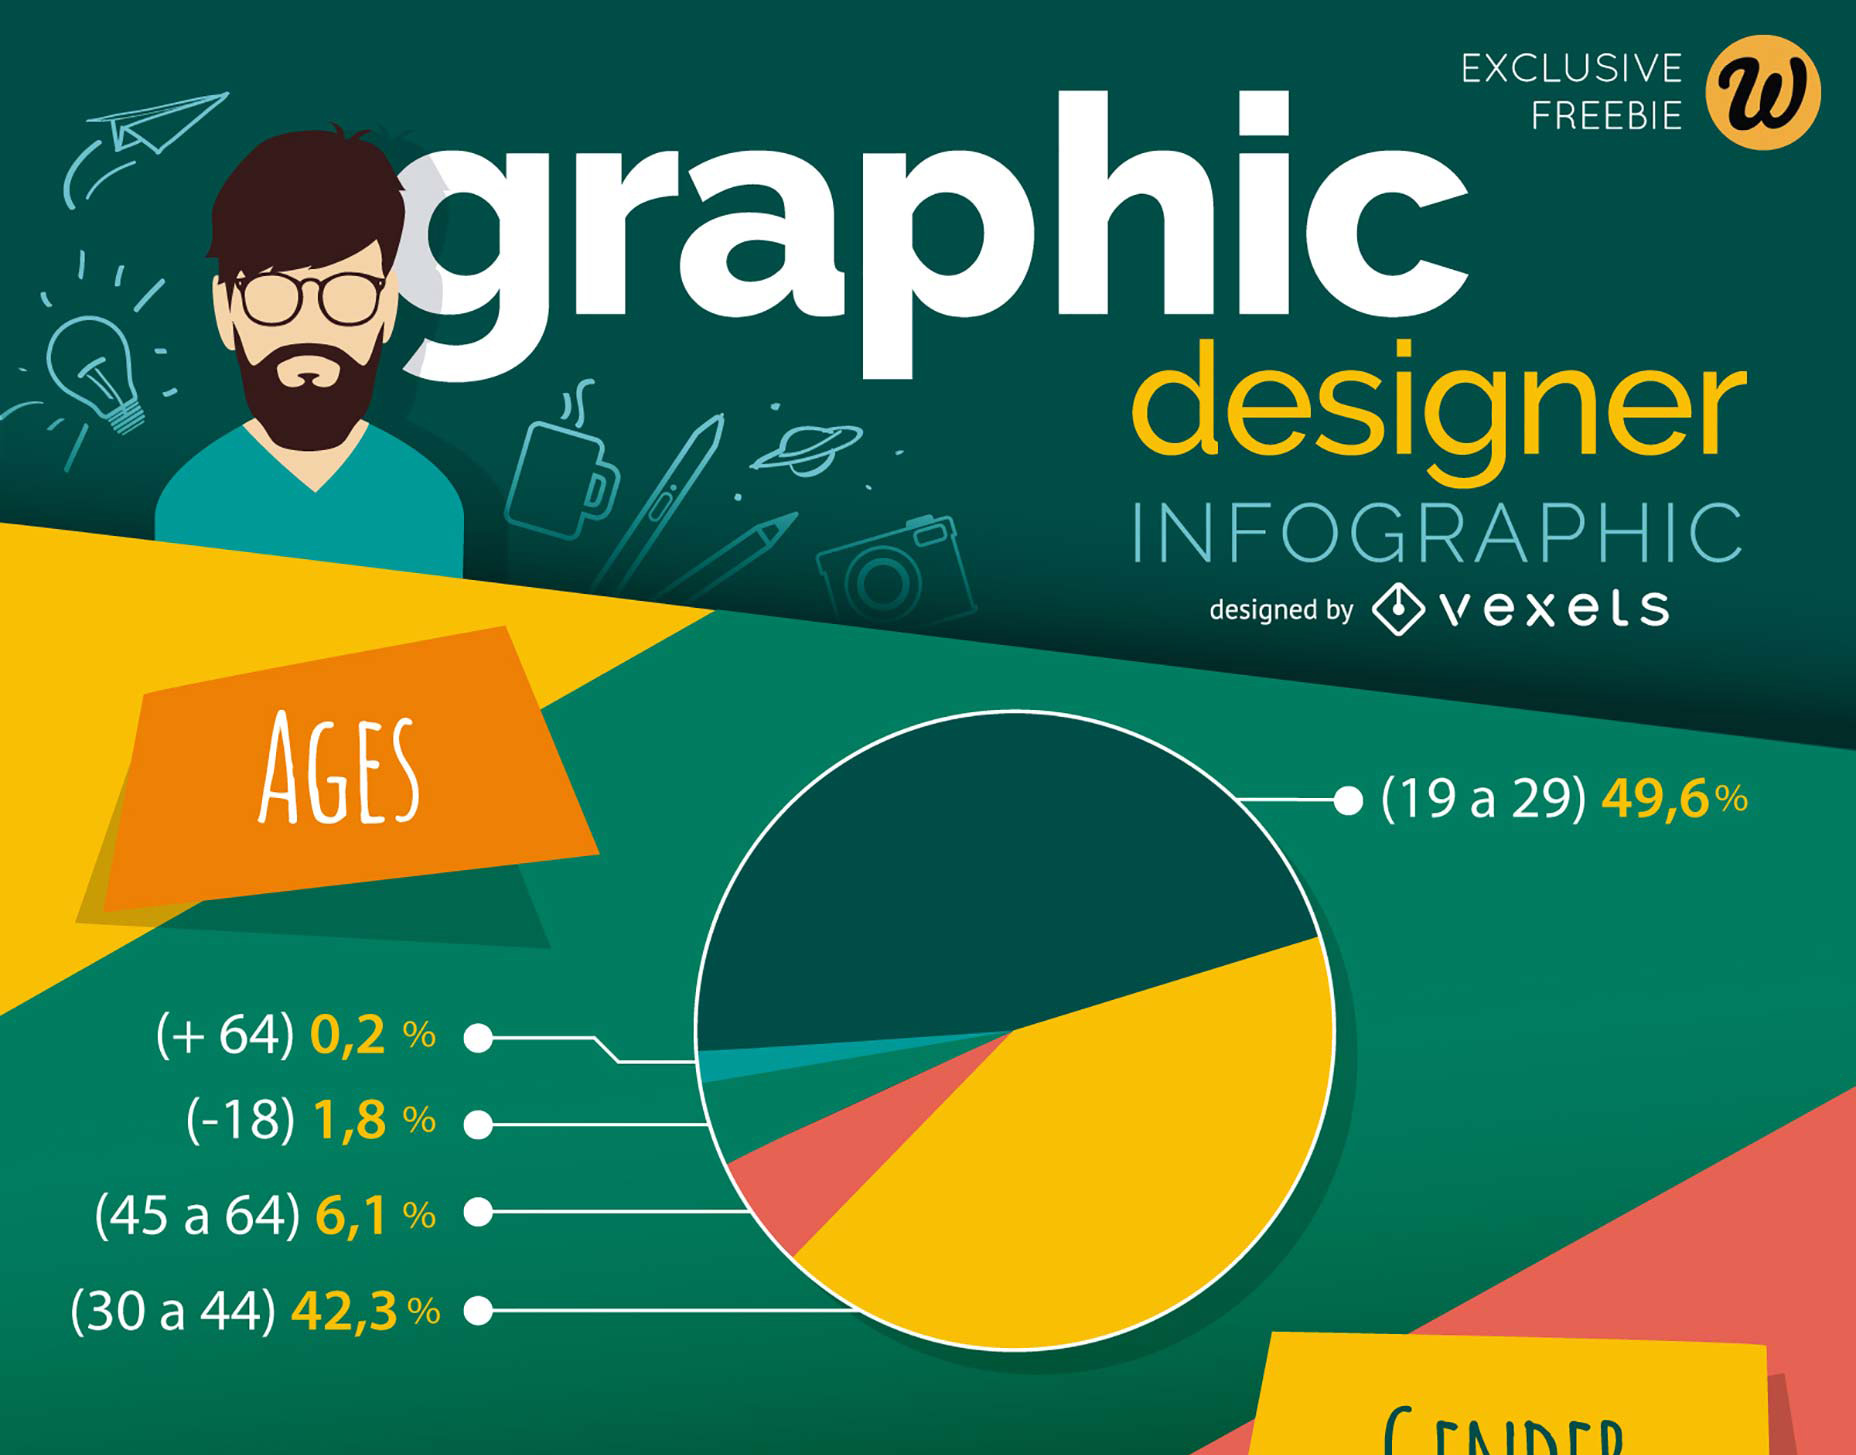 The Best Infographic Template with Tips on Design Elements - BrandonGaille.com